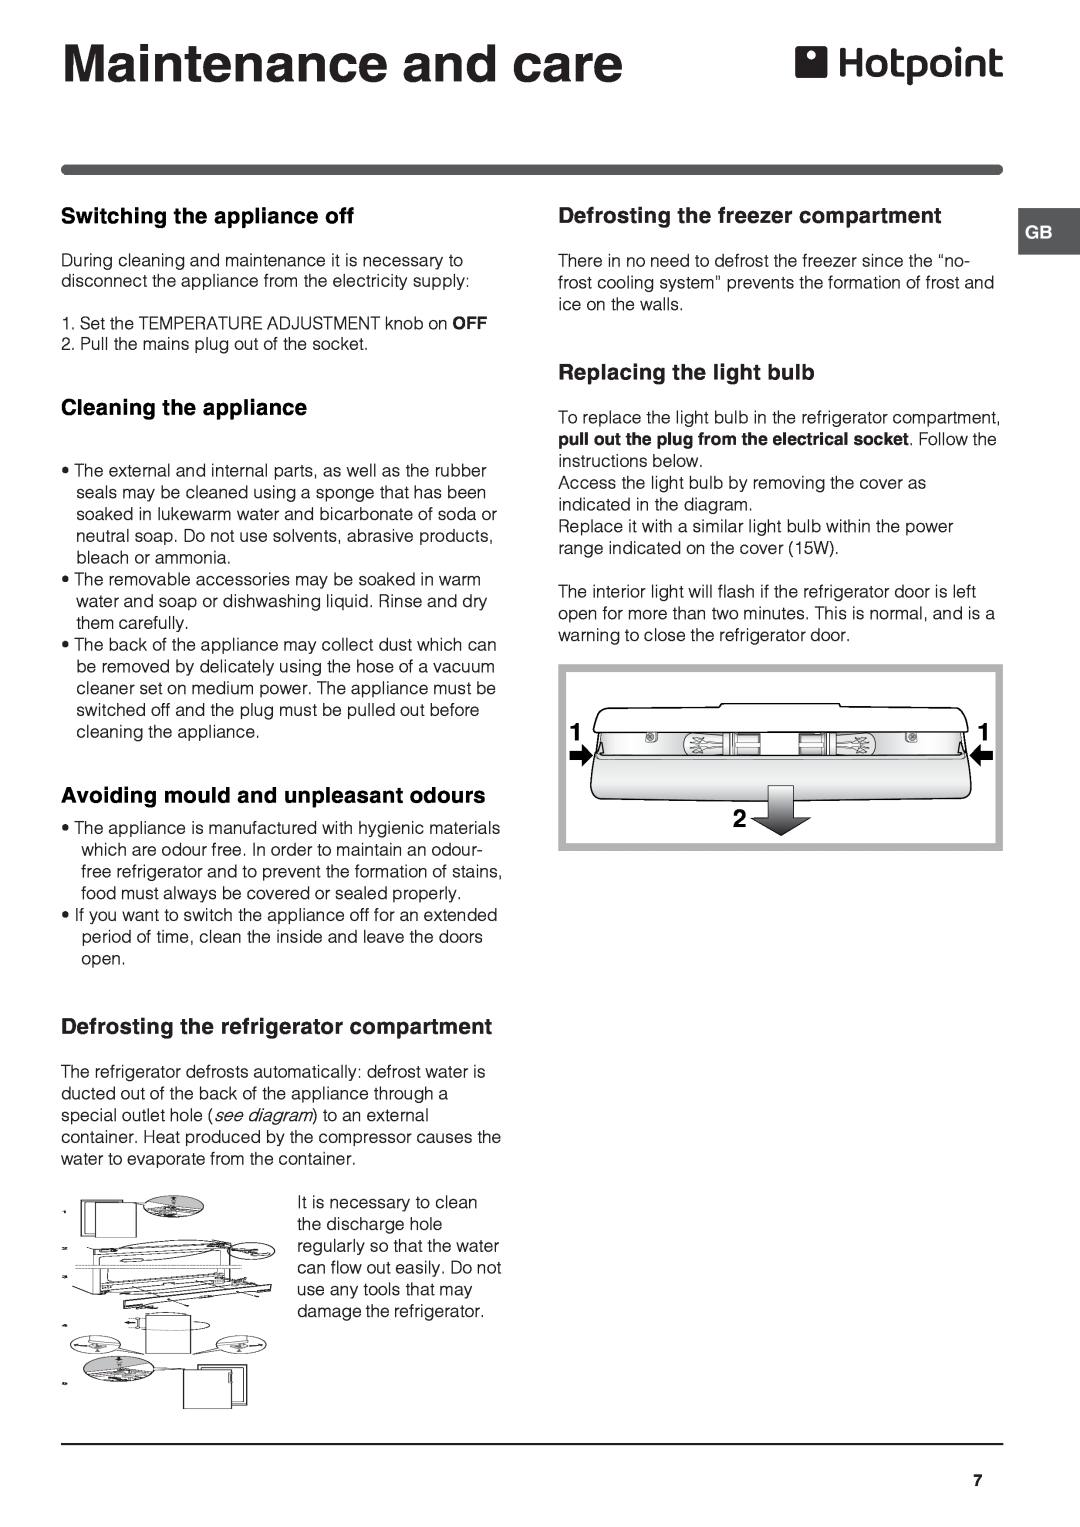 Hotpoint FFP187MP, FFP187MG Maintenance and care, Switching the appliance off, Defrosting the freezer compartment 